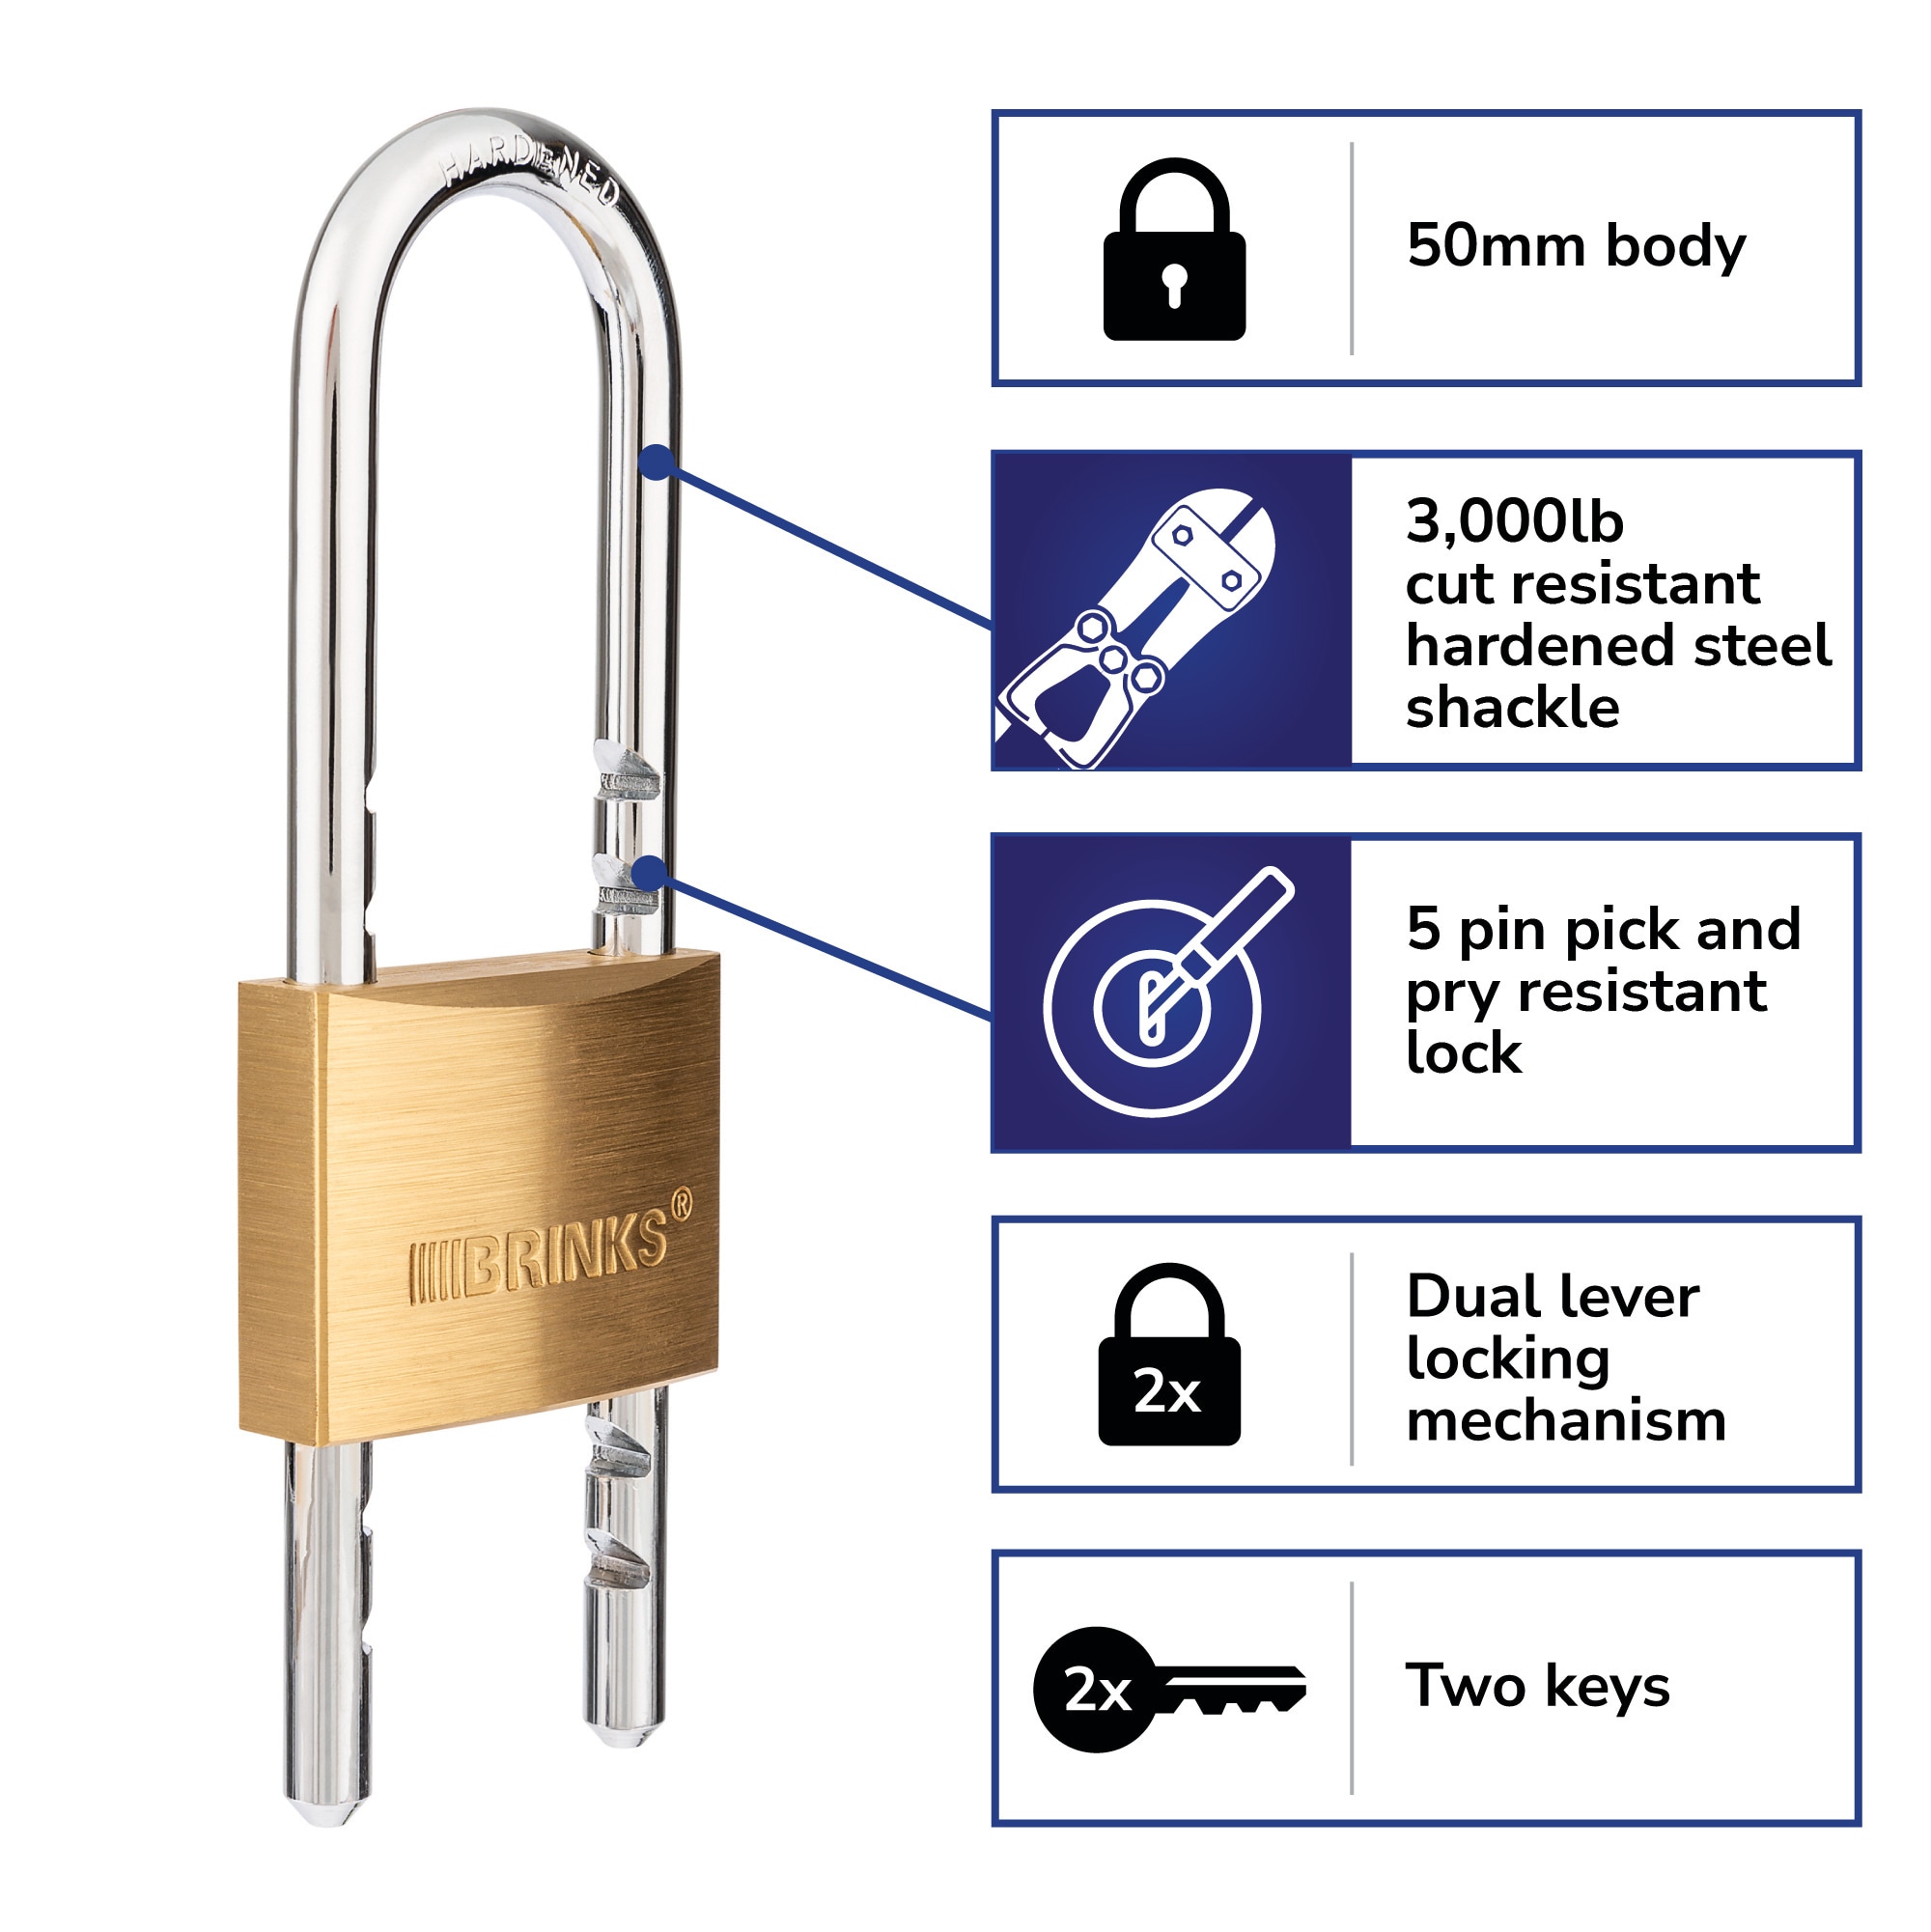 Solid Brass Lock and Key,Pad Lock with 1-9/16 in. (40 mm) Wide Lock Body,  2-1/2 in. Long Shackle Gate Padlock for Outdoor Fence， Sheds, Storage Unit